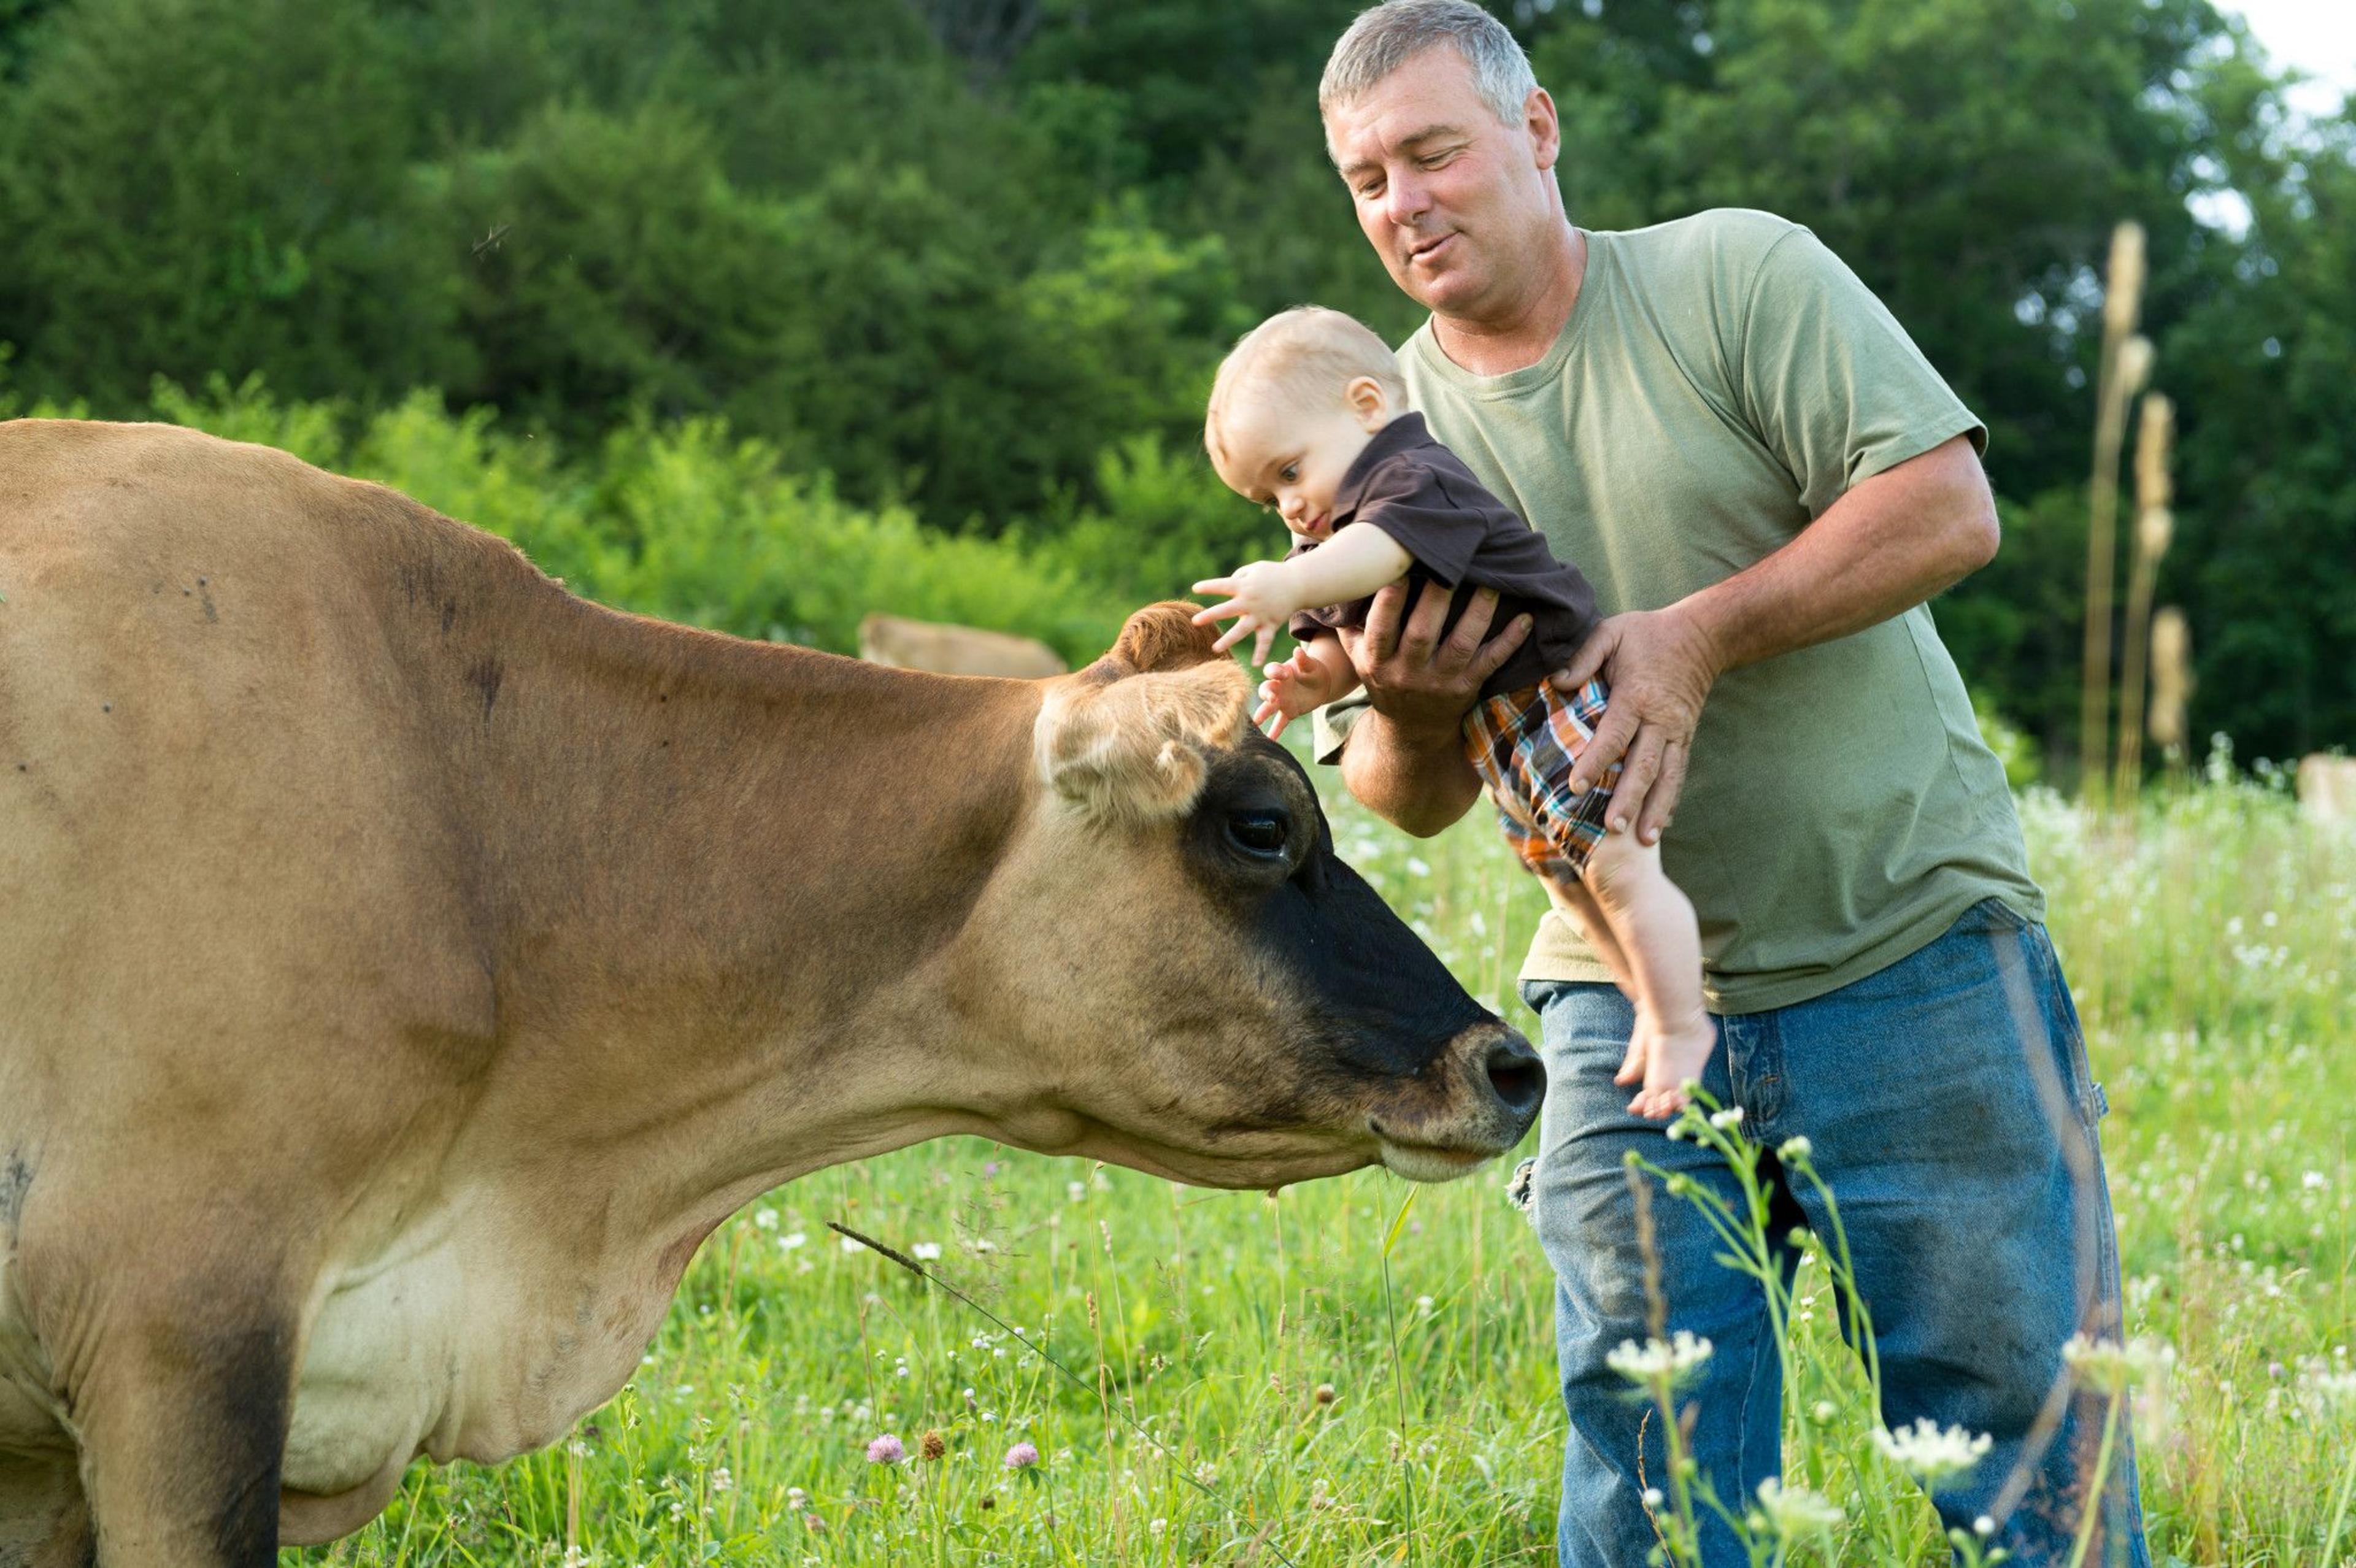 Arnie Trussoni stands in a field and holds a baby at his organic farm in Wisconsin.